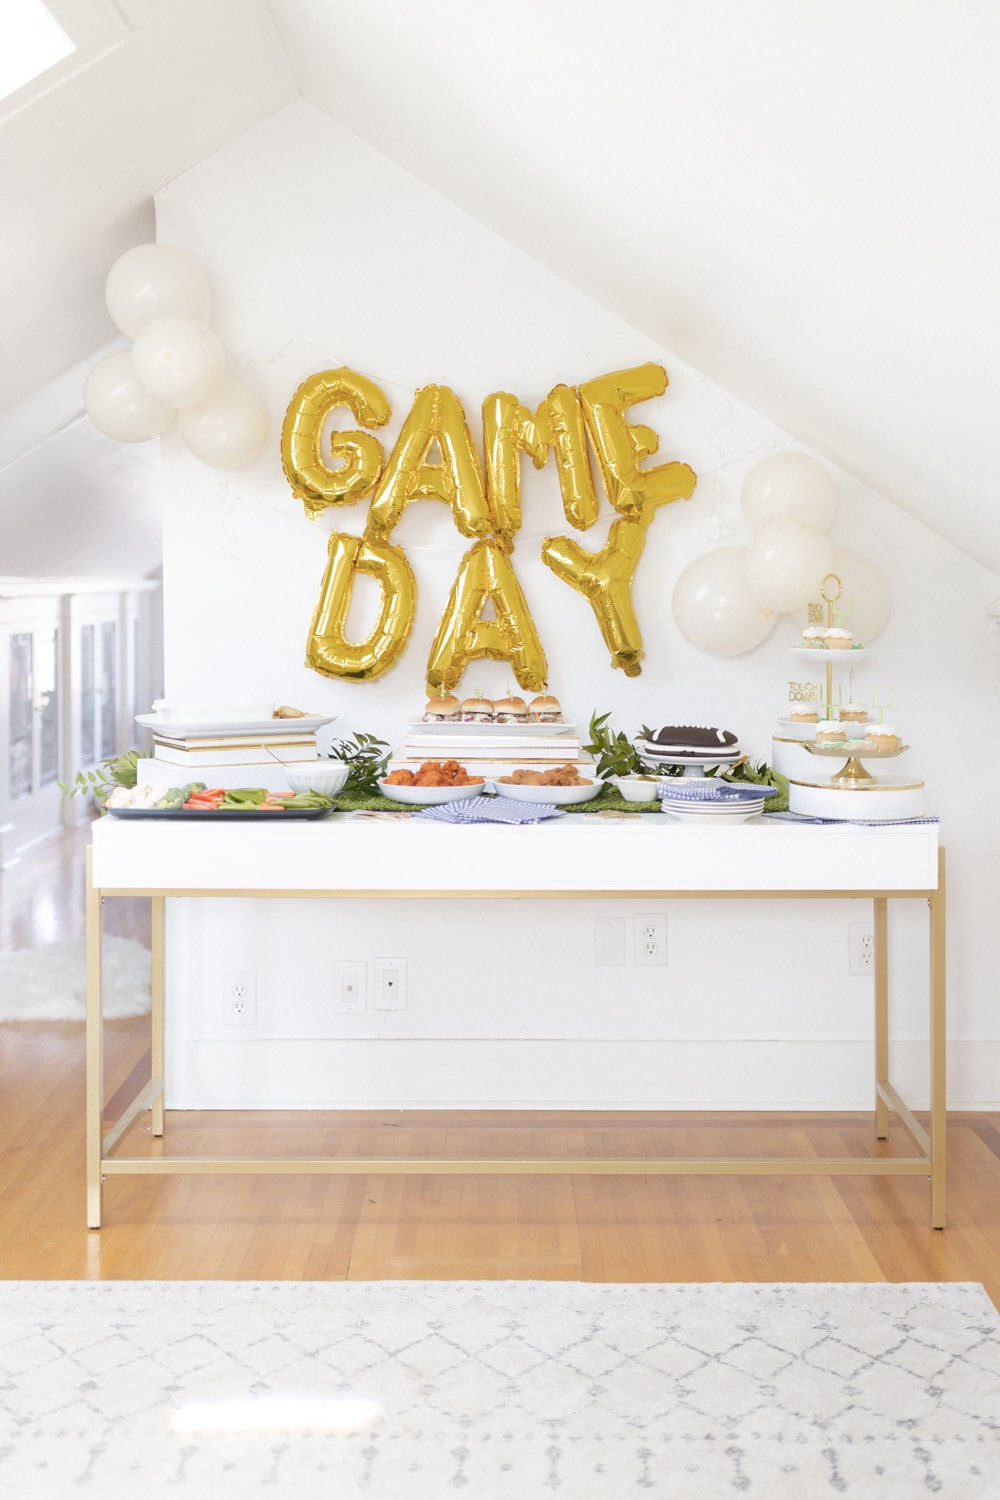 Game day food spread created by blogger Stephanie Ziajka on Diary of a Debutante